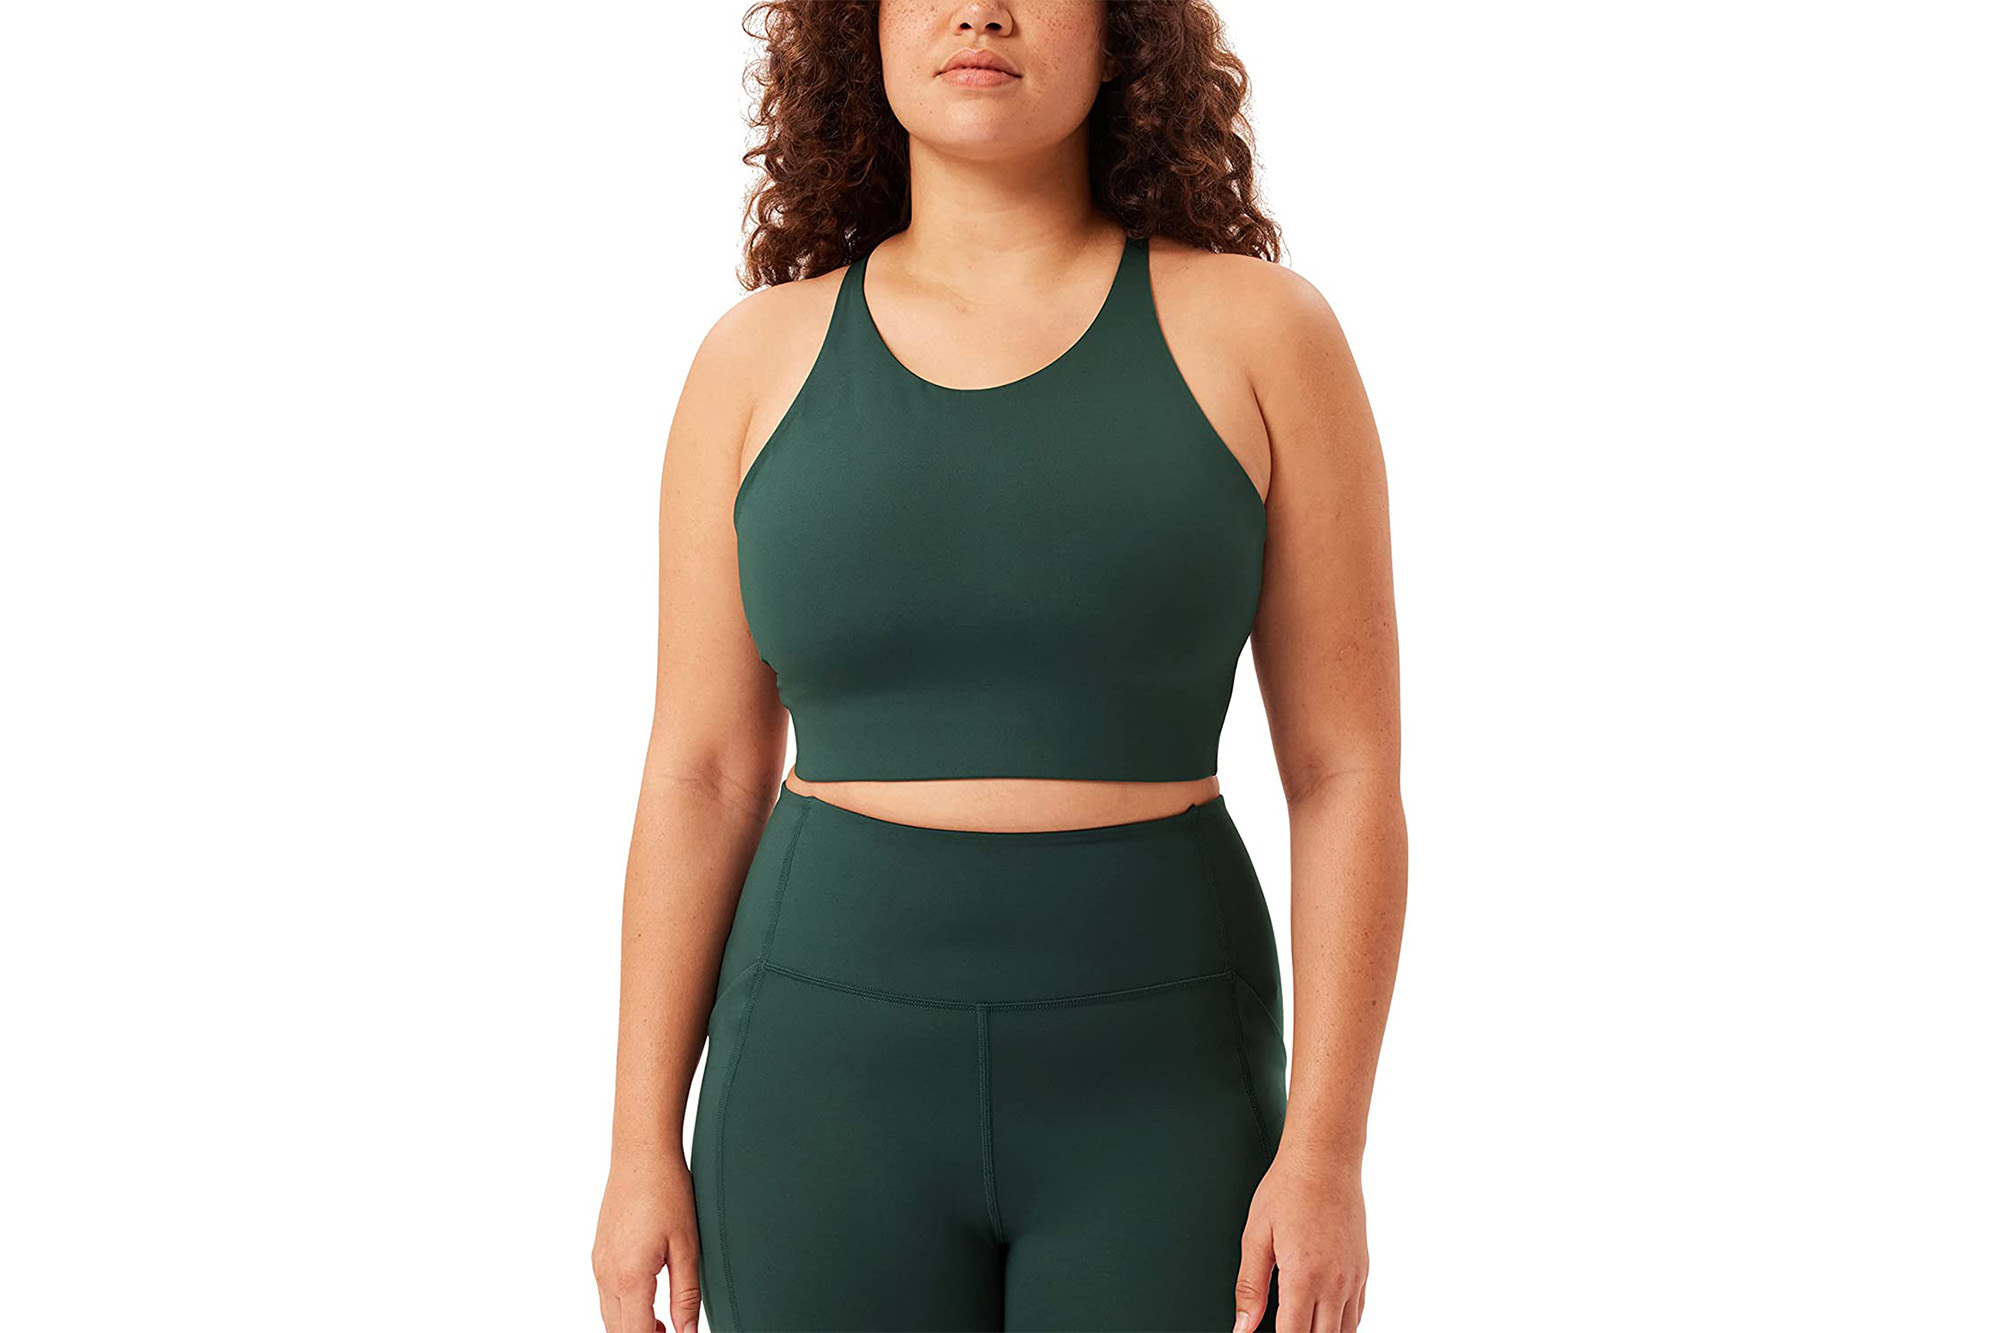 A model in a dark green sports bra and matching leggings